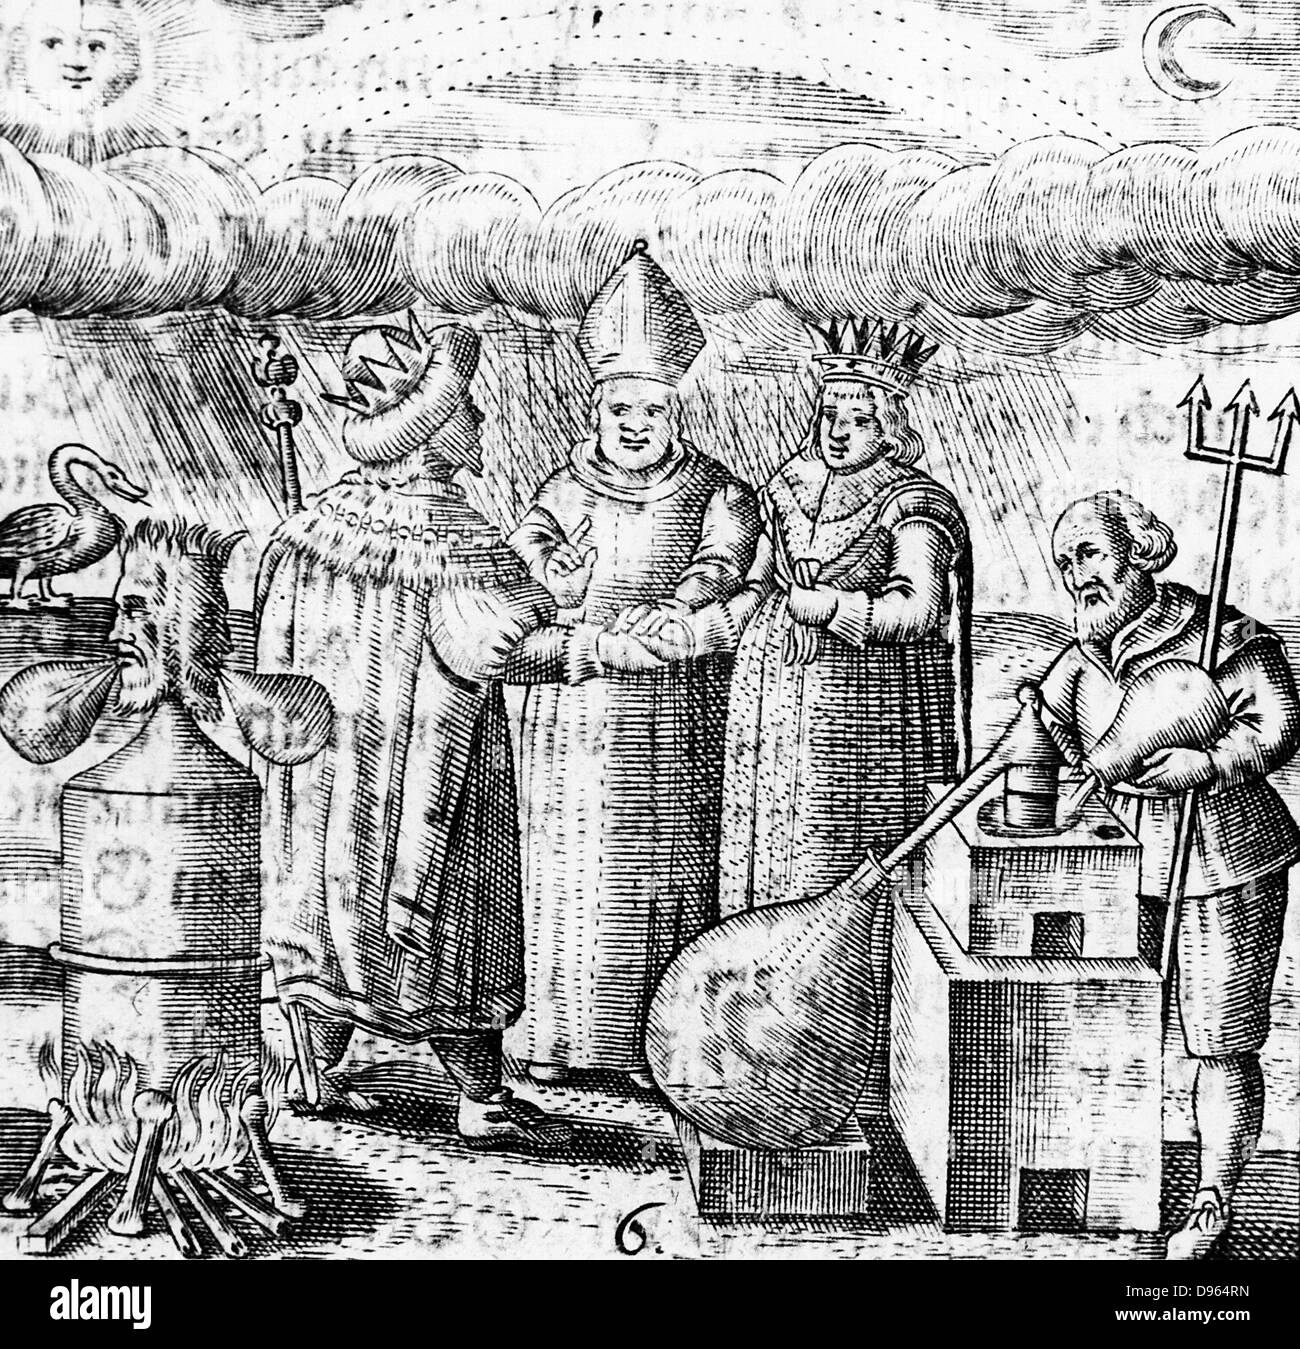 The Sixth Key of Basil Valentine, legendary 15th century German monk, showing the marriage of the alchemical king (gold) and queen (silver) and the process of distillation in furnace using an alembic in water bath or bain marie. From 'Von dem grossen Stein Uhralten' by Basil Valentine (Strasbourg, 1651). Engraving. Stock Photo